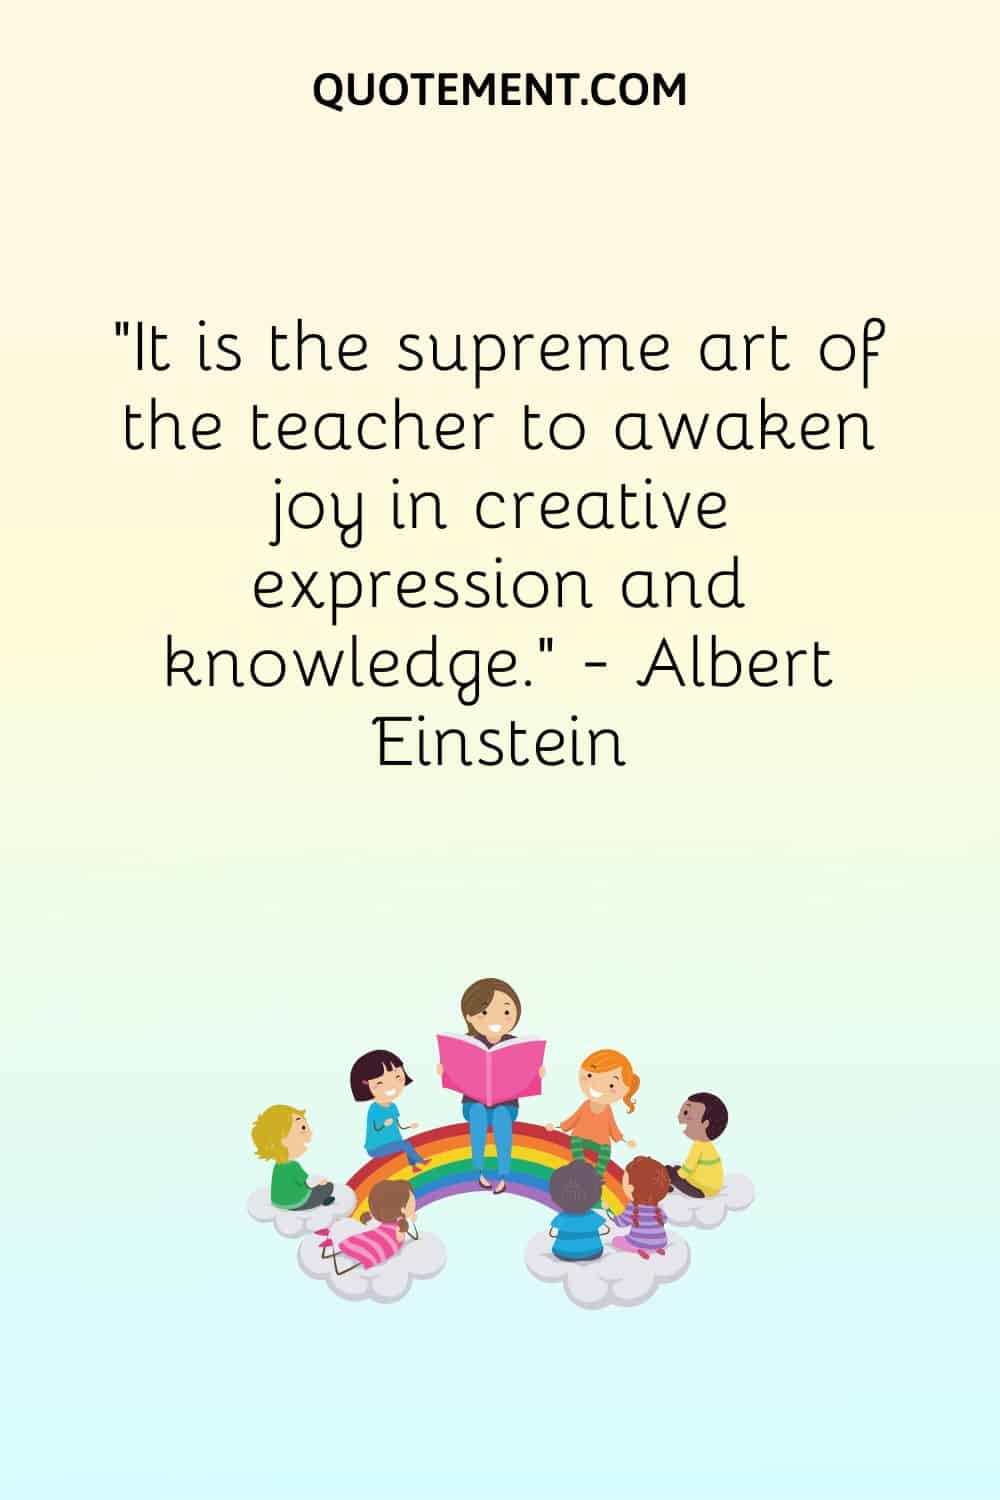 It is the supreme art of the teacher to awaken joy in creative expression and knowledge